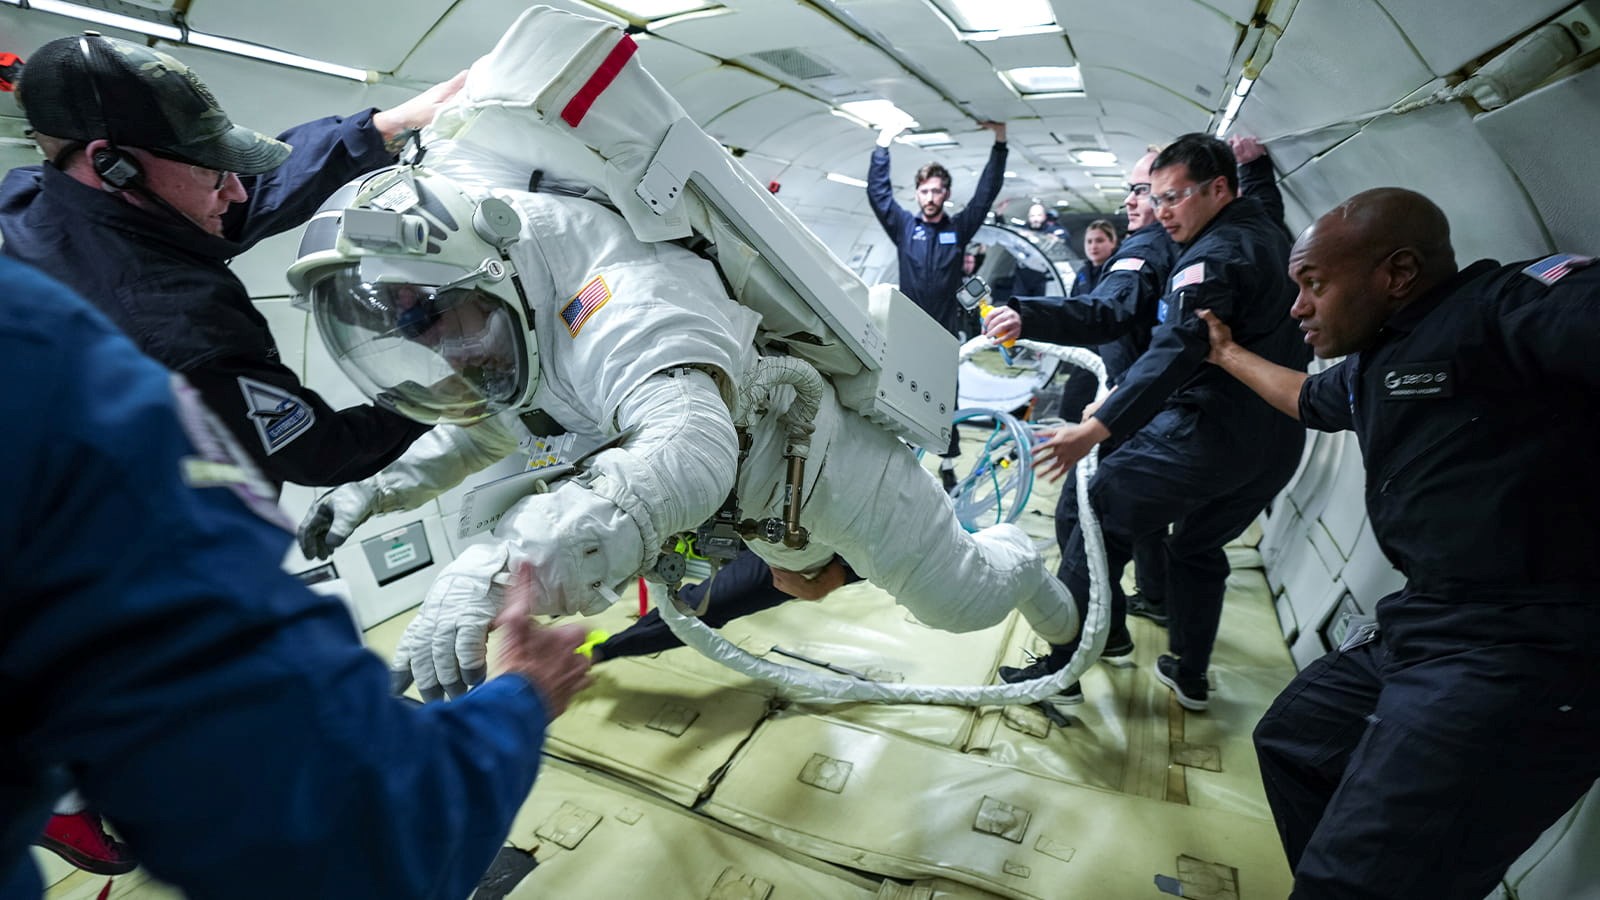 Technology: NASA is replacing a 40-year-old spacesuit, and the new one just passed microgravity testing